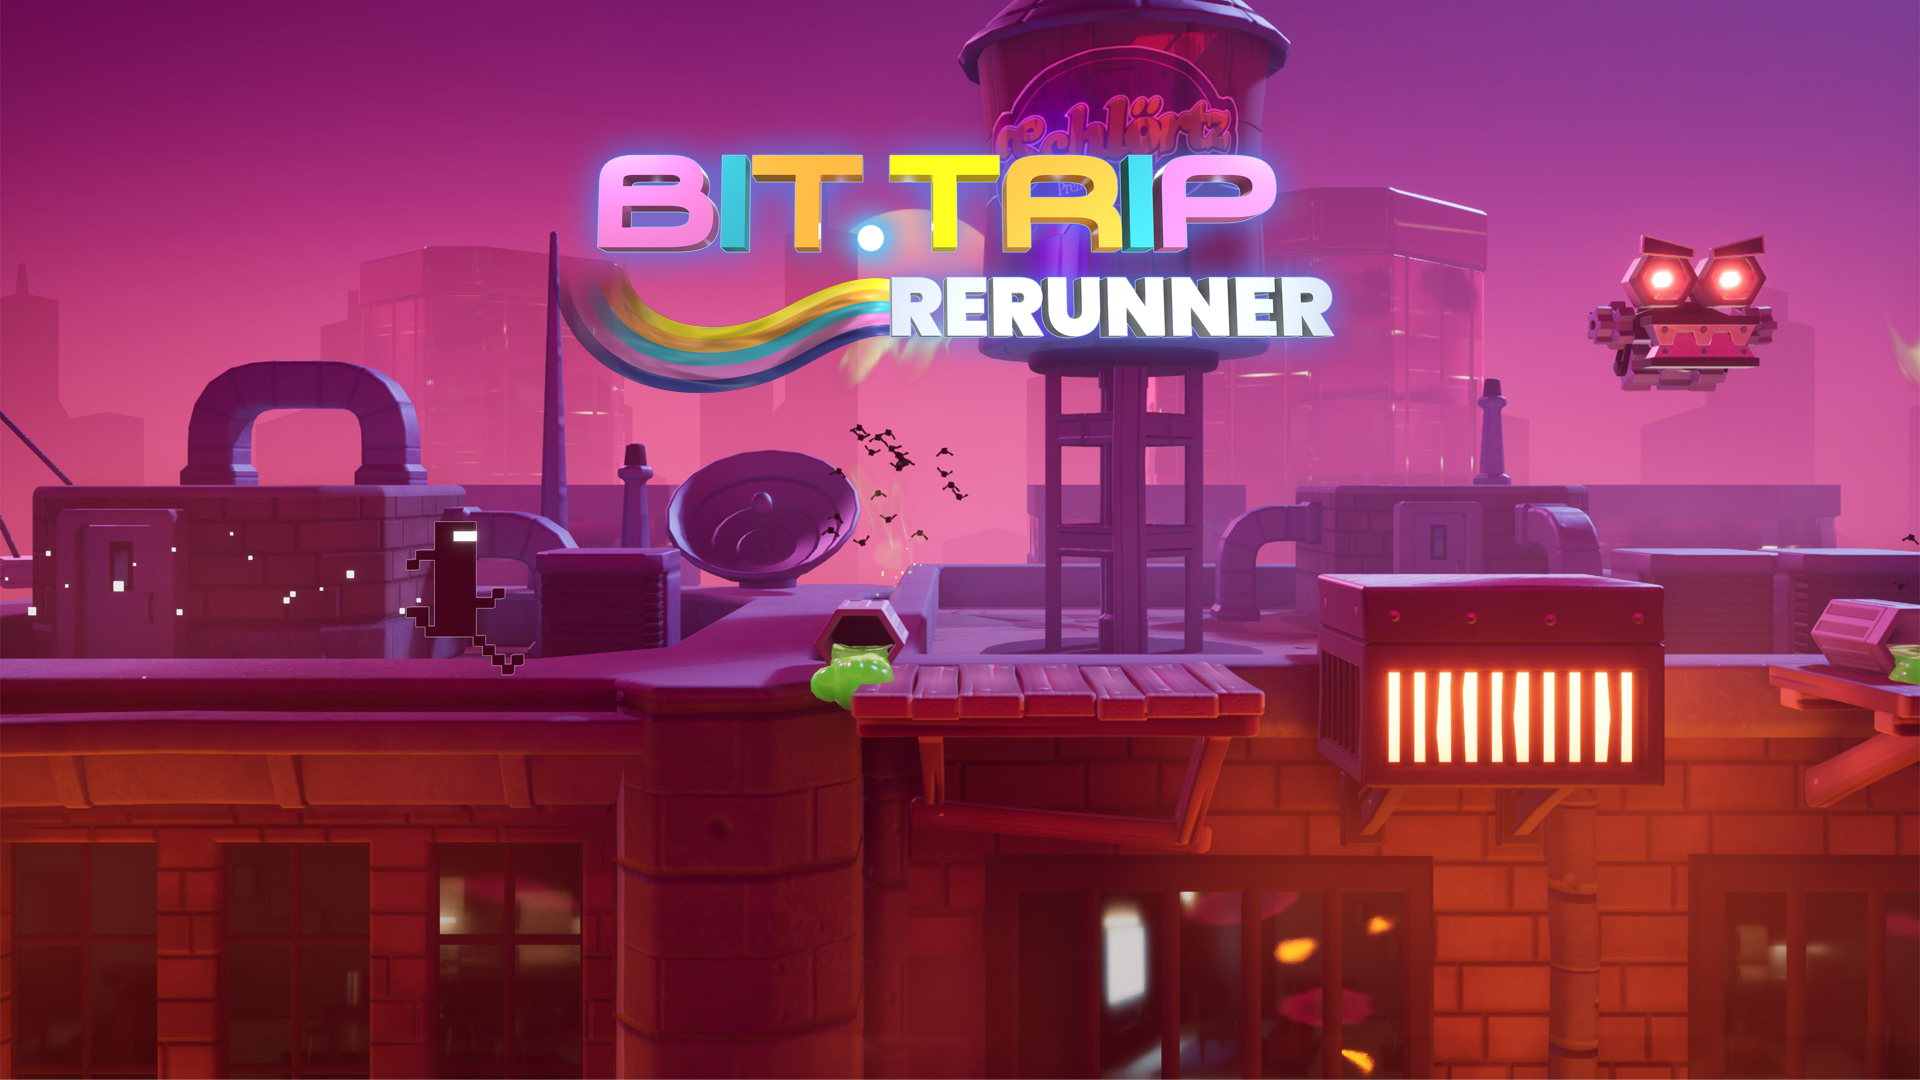 BIT.TRIP Rerunner is now available